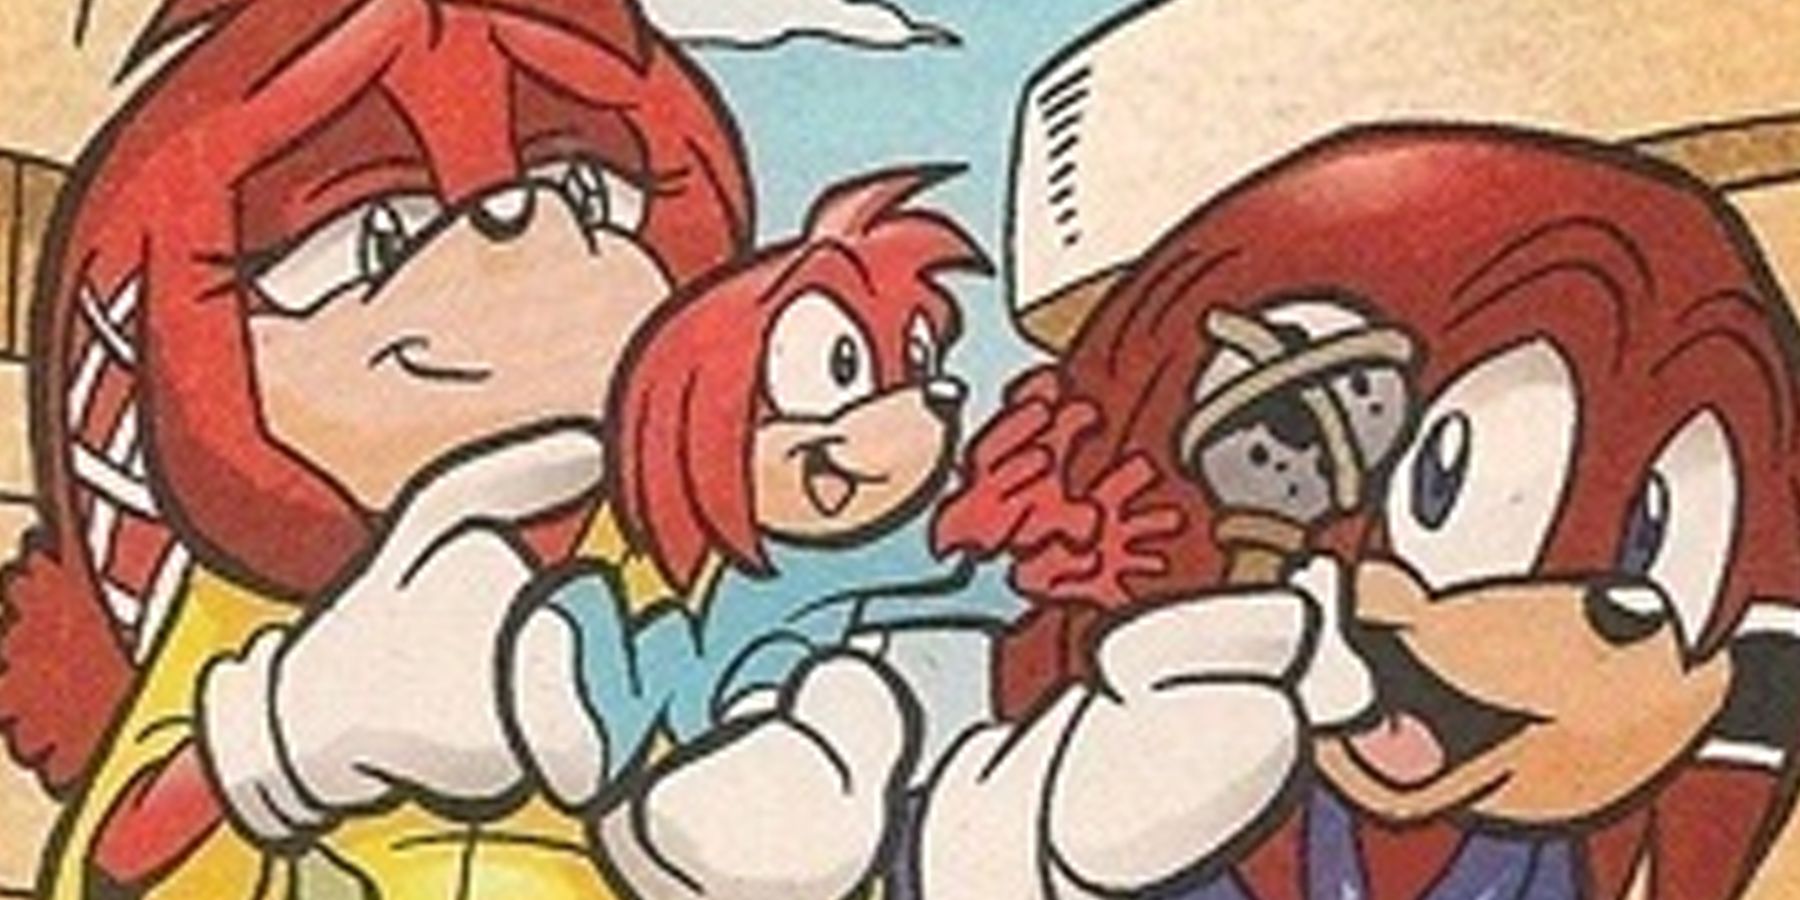 Knuckles and his parents